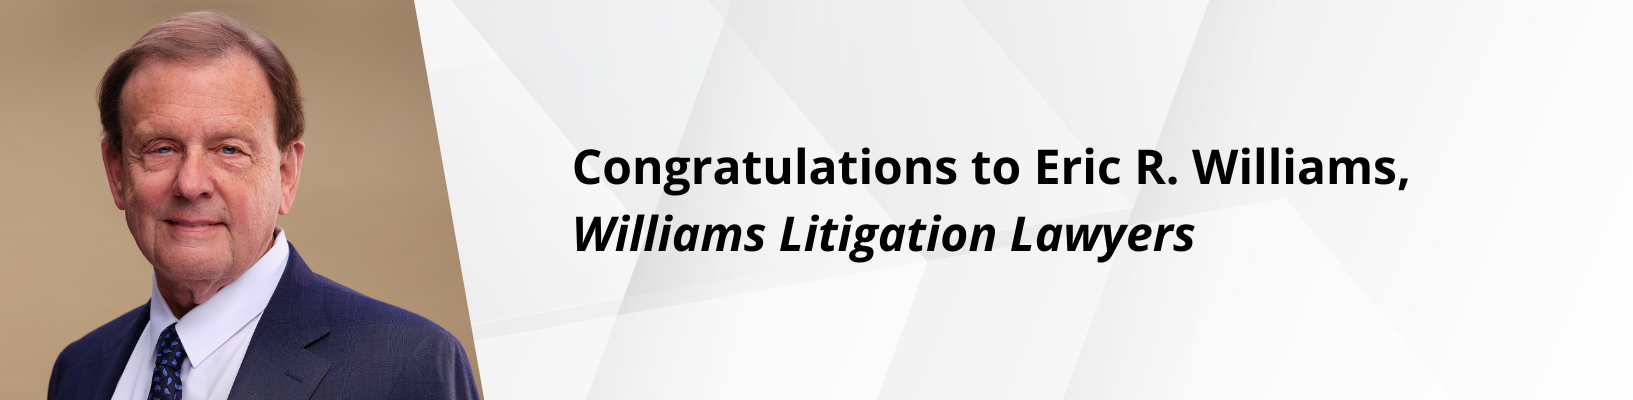 Congratulations to Eric R. Williams, Williams Litigation Lawyers, the 2024 recipient of The John P. Nelligan Award for Excellence in Advocacy